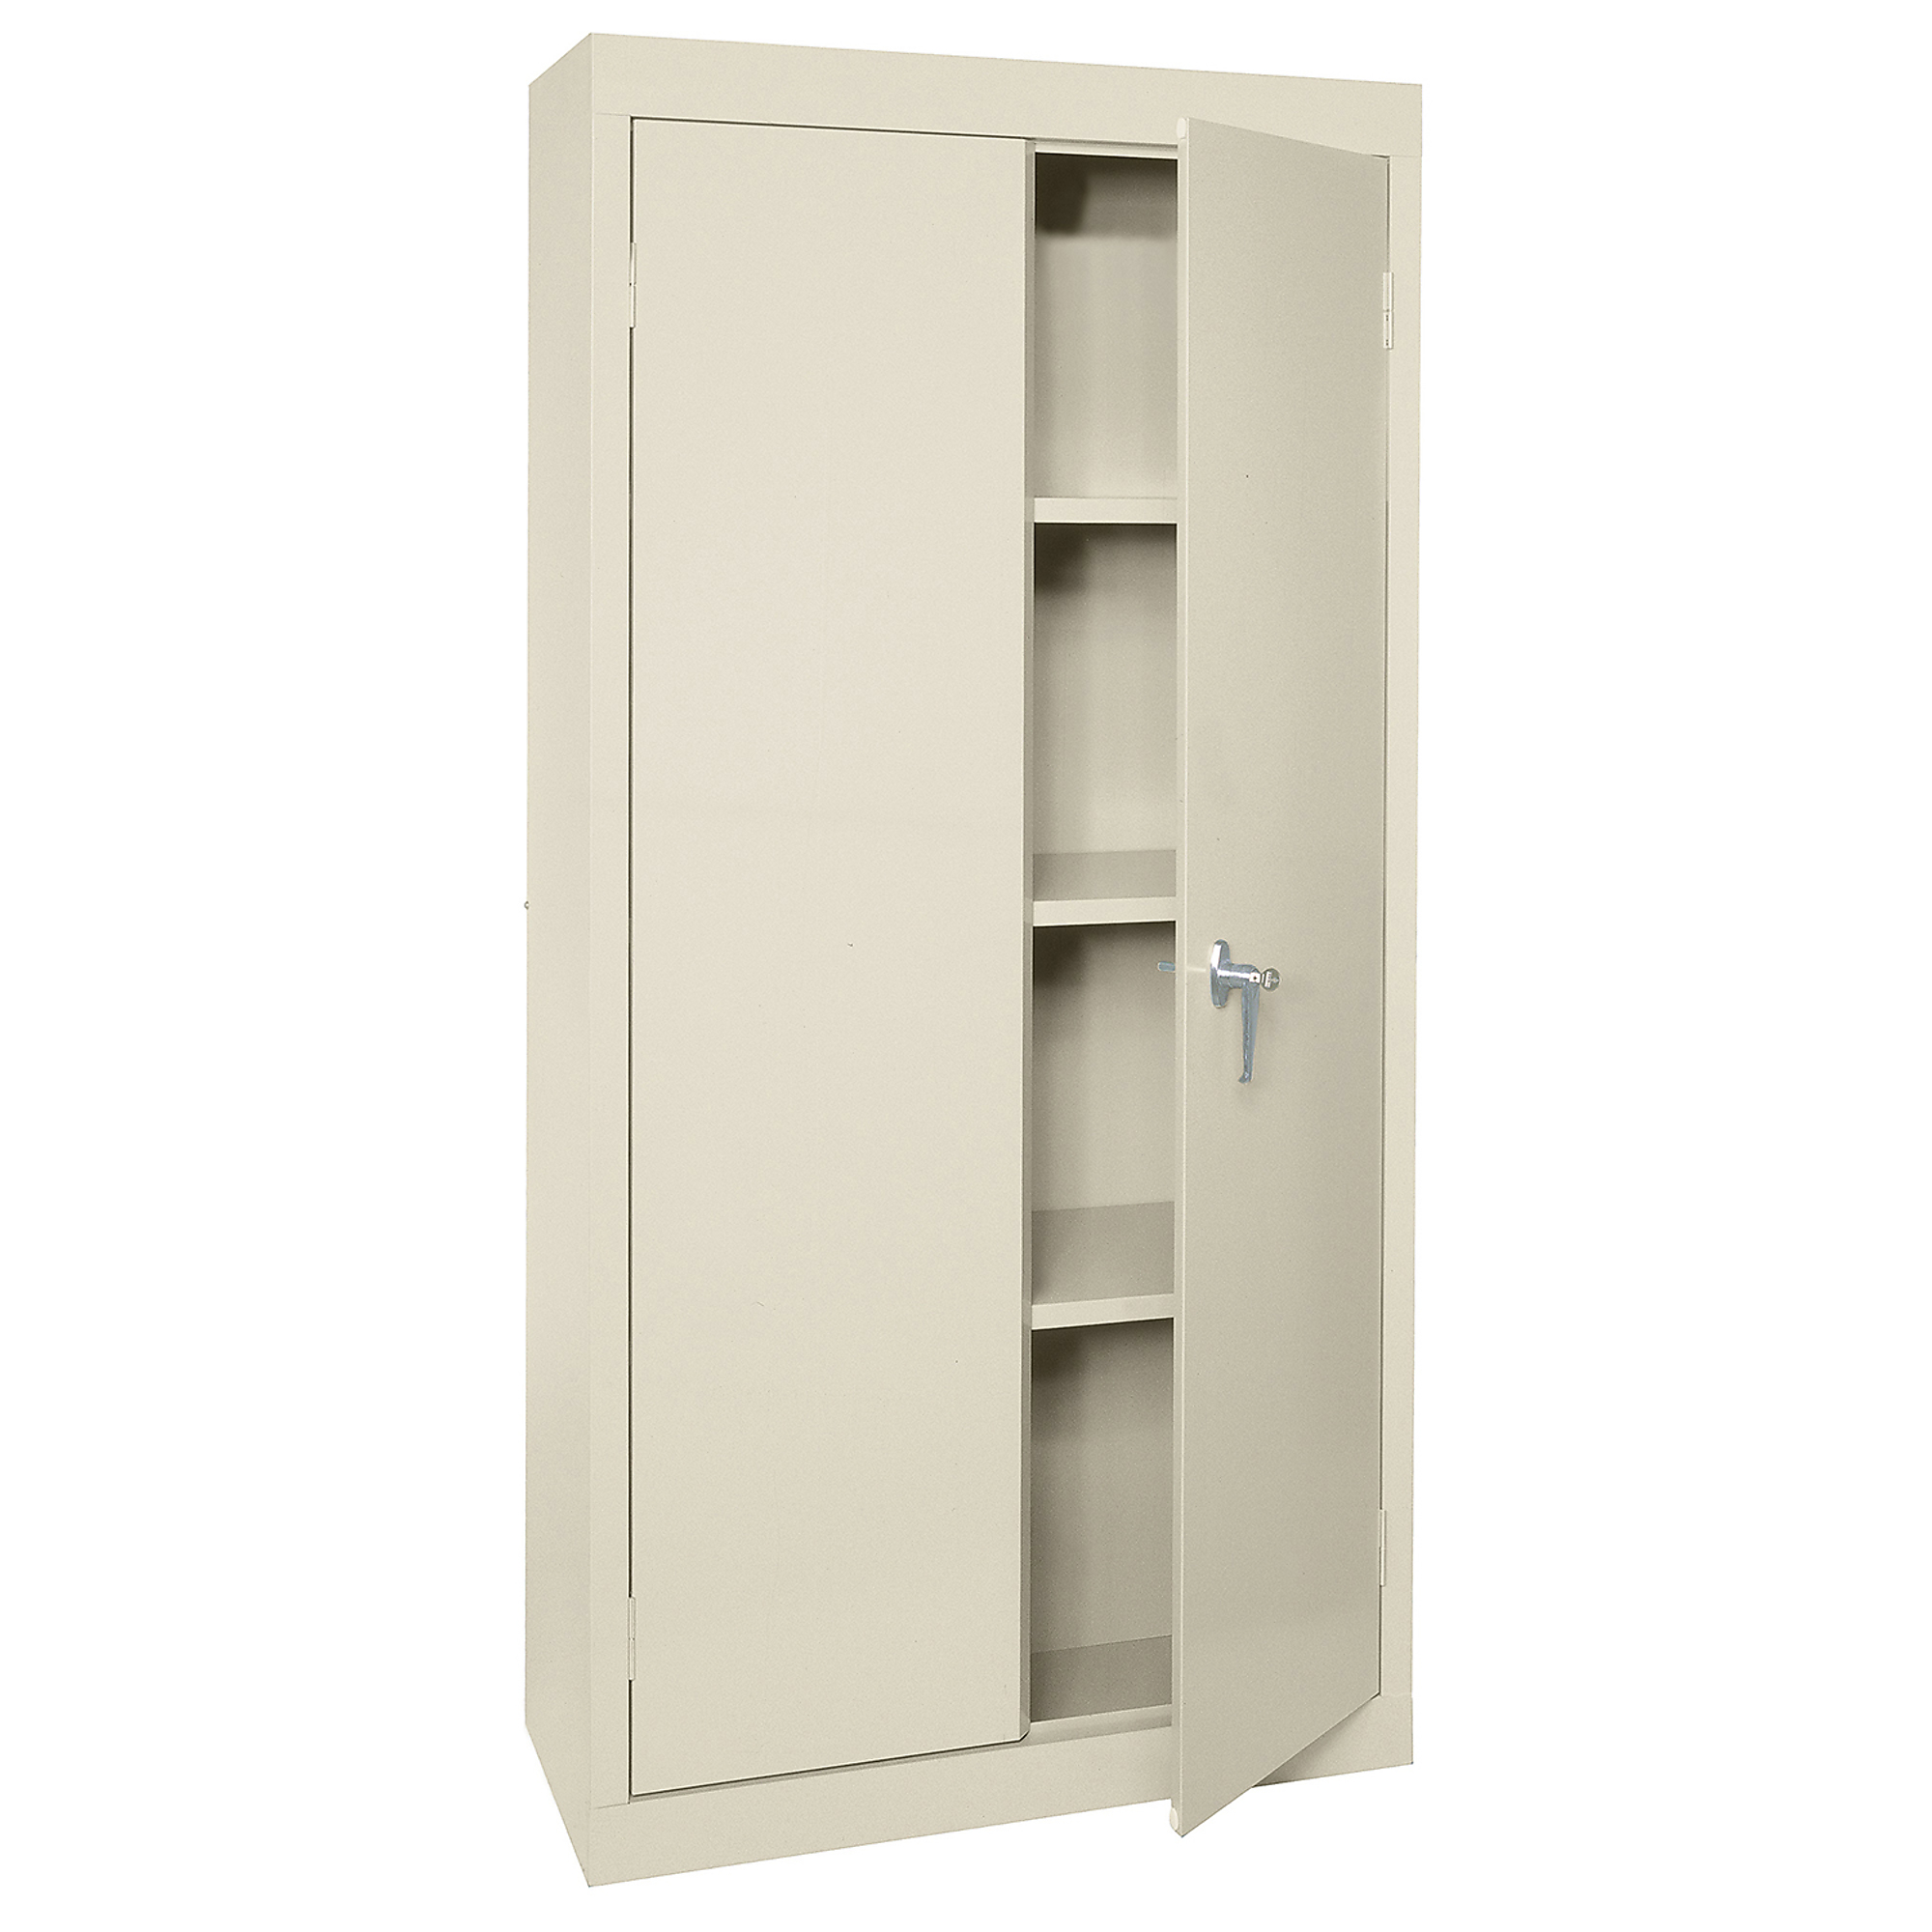 Sandusky, Value Line Cabinet 30x18x72 Putty, Height 72 in, Width 30 in, Color Putty, Model - Sandusky Lee VF31301872-07